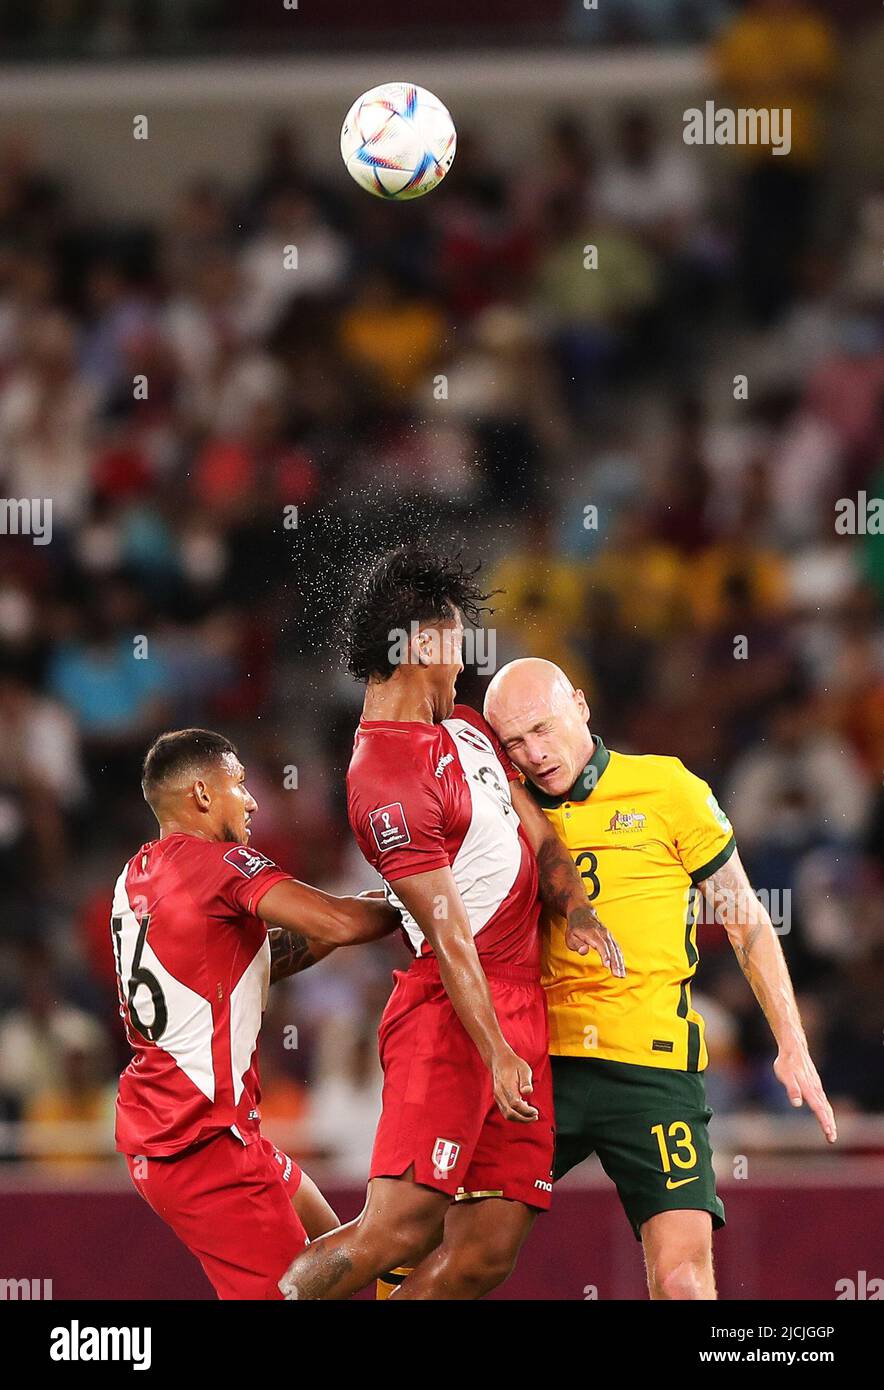 Doha, Qatar. 13th June, 2022. Aaron Mooy (R) of Australia vies with Renato Tapia (C), Christofer Gonzales of Peru during the FIFA World Cup 2022 intercontinental play-offs match between Australia and Peru at the Ahmed bin Ali Stadium, Doha, Qatar, June 13, 2022. Credit: Wang Dongzhen/Xinhua/Alamy Live News Stock Photo